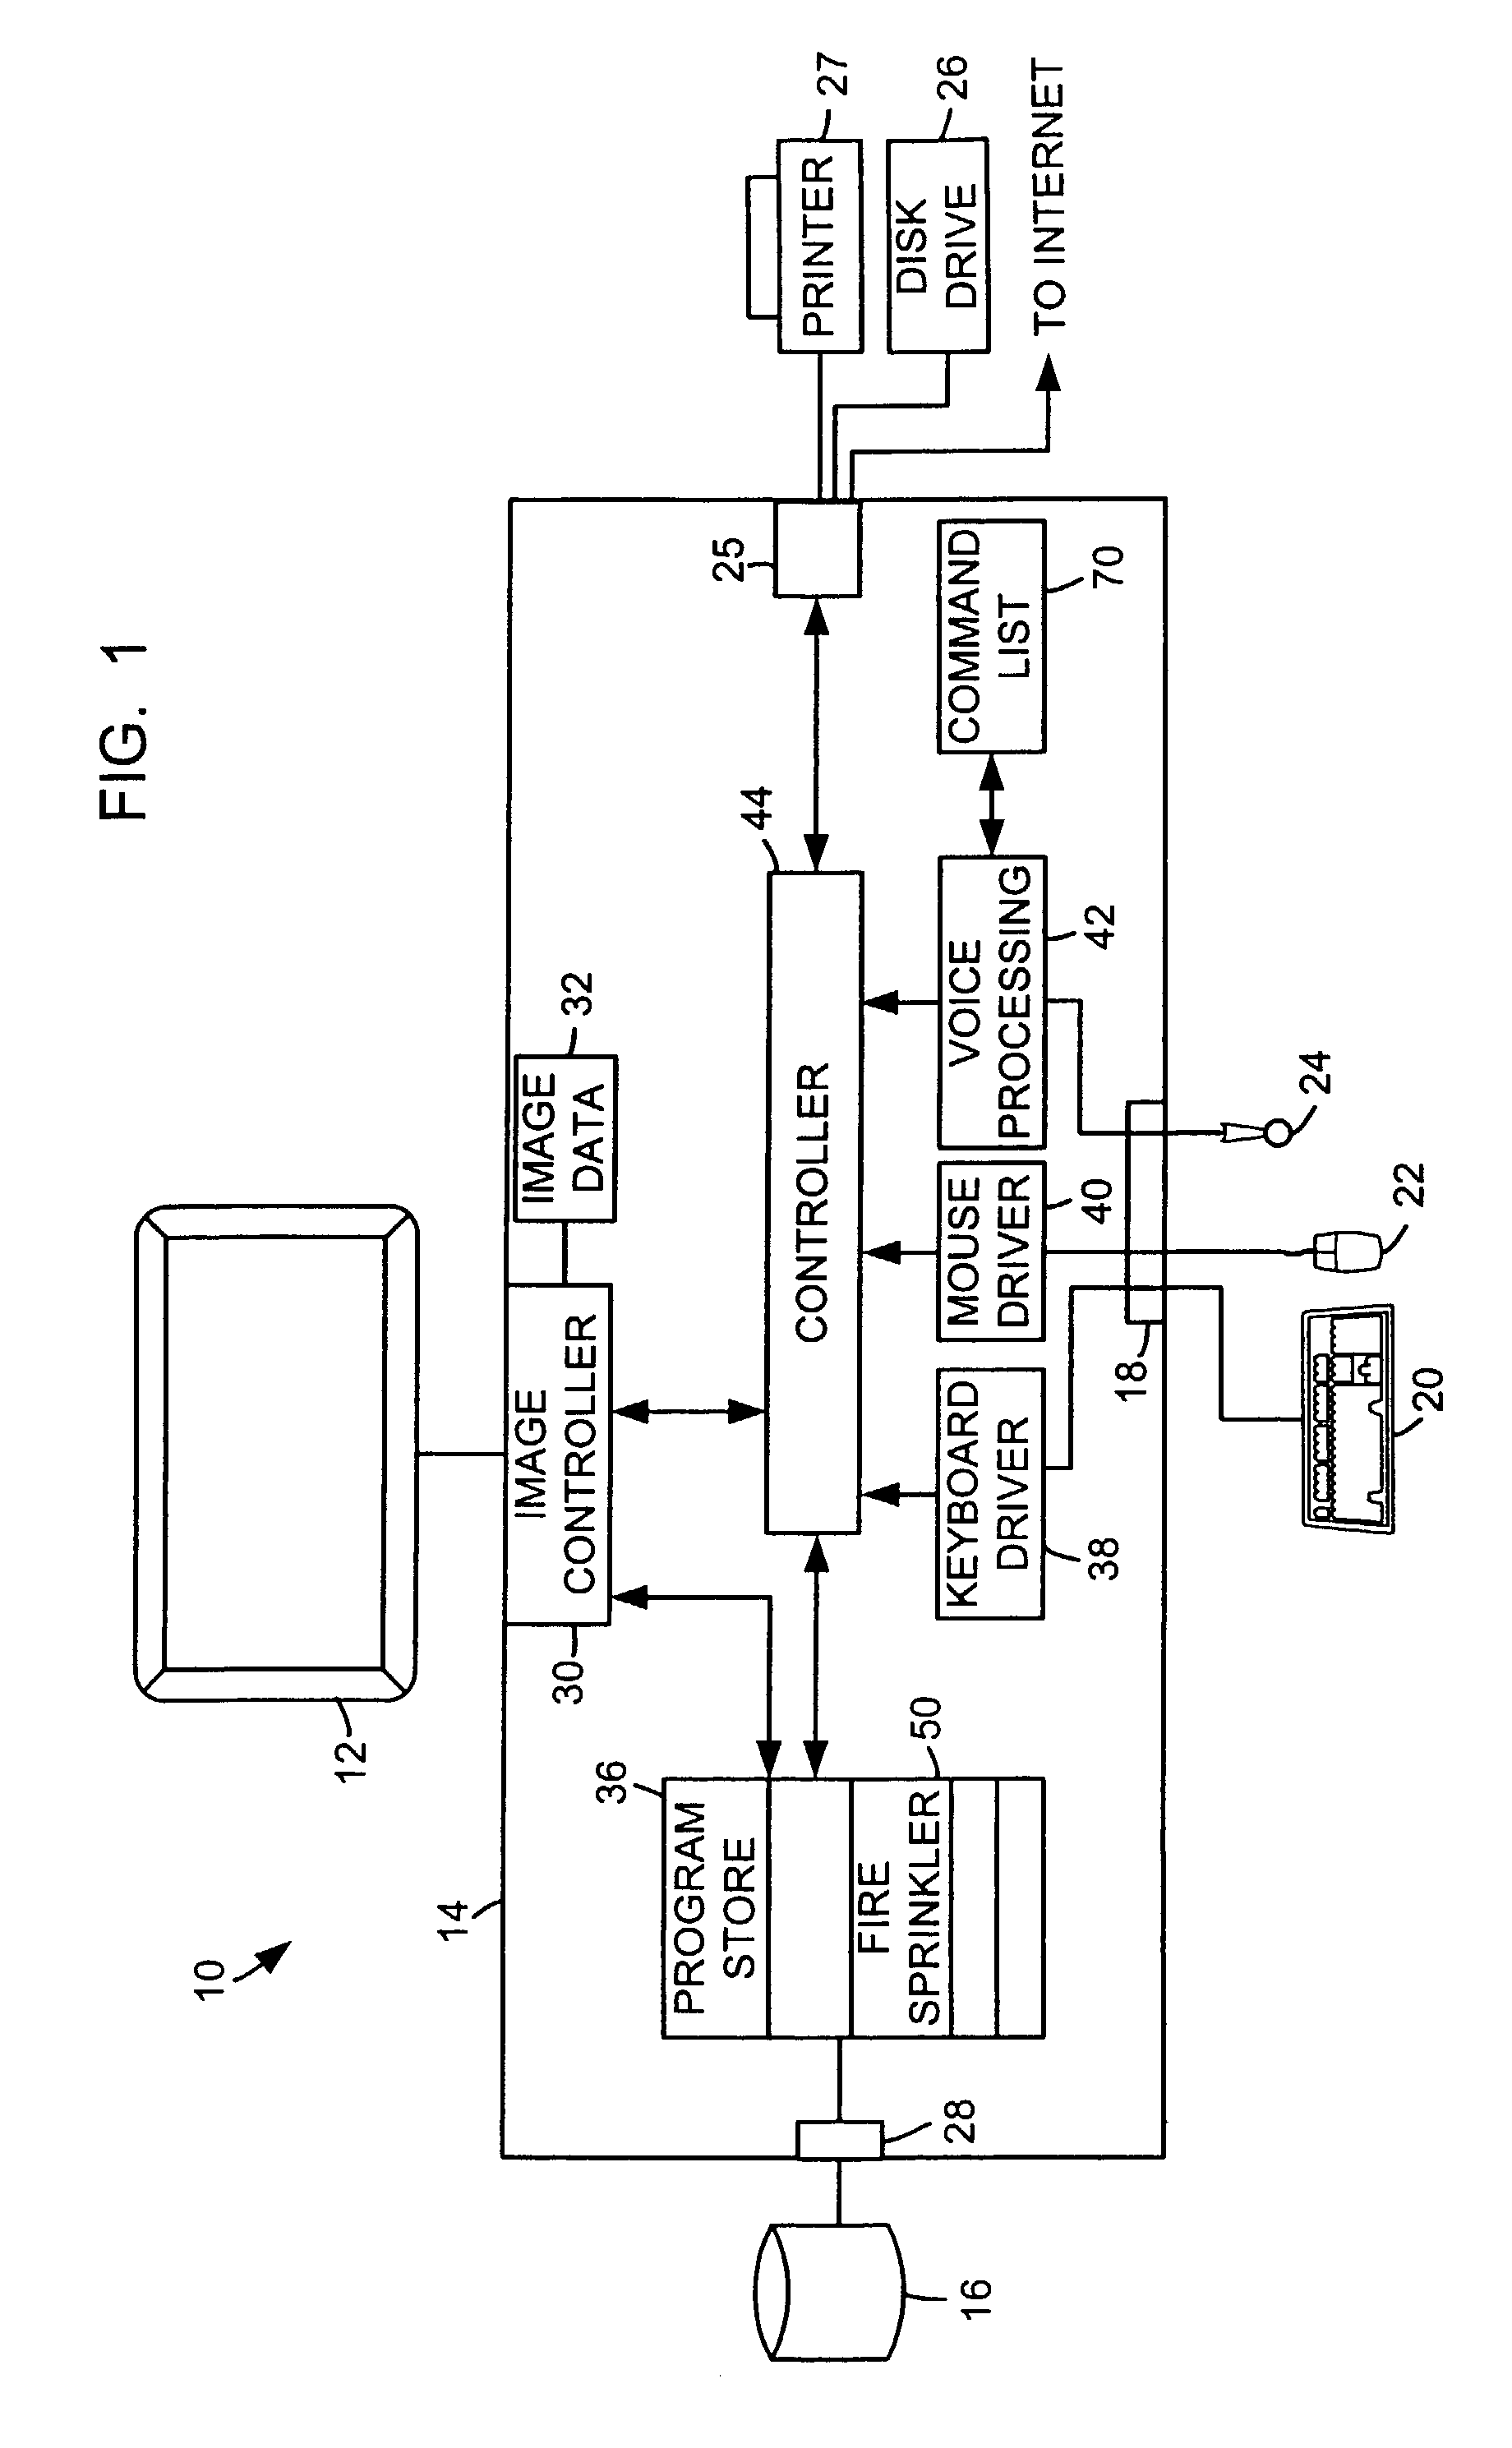 Voice activated commands in a building construction drawing system